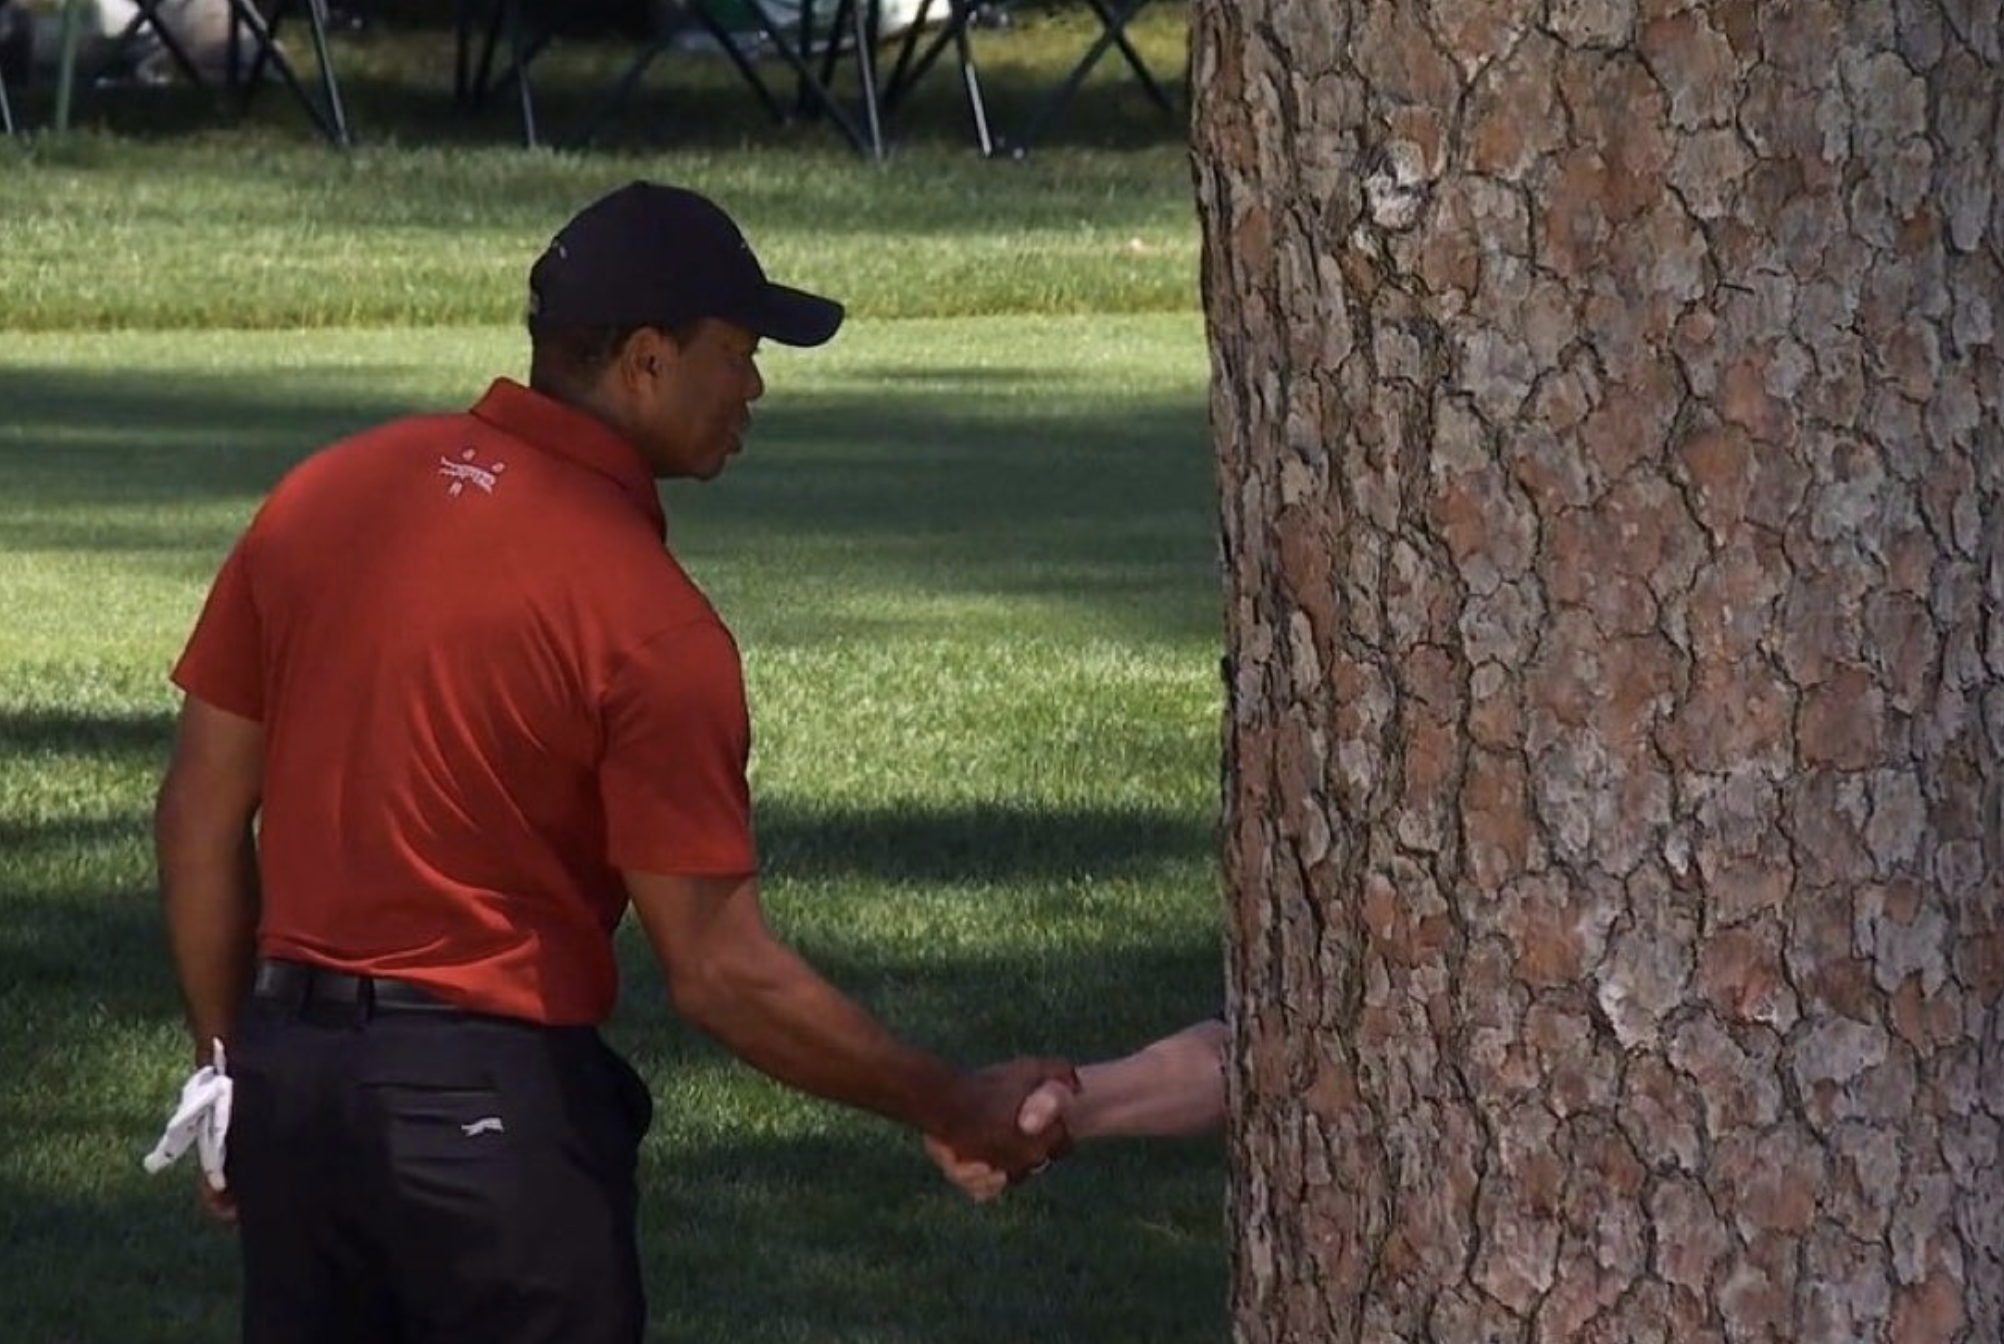 Tiger Woods shakes hands with a person obscured by a tree trunk on a golf course